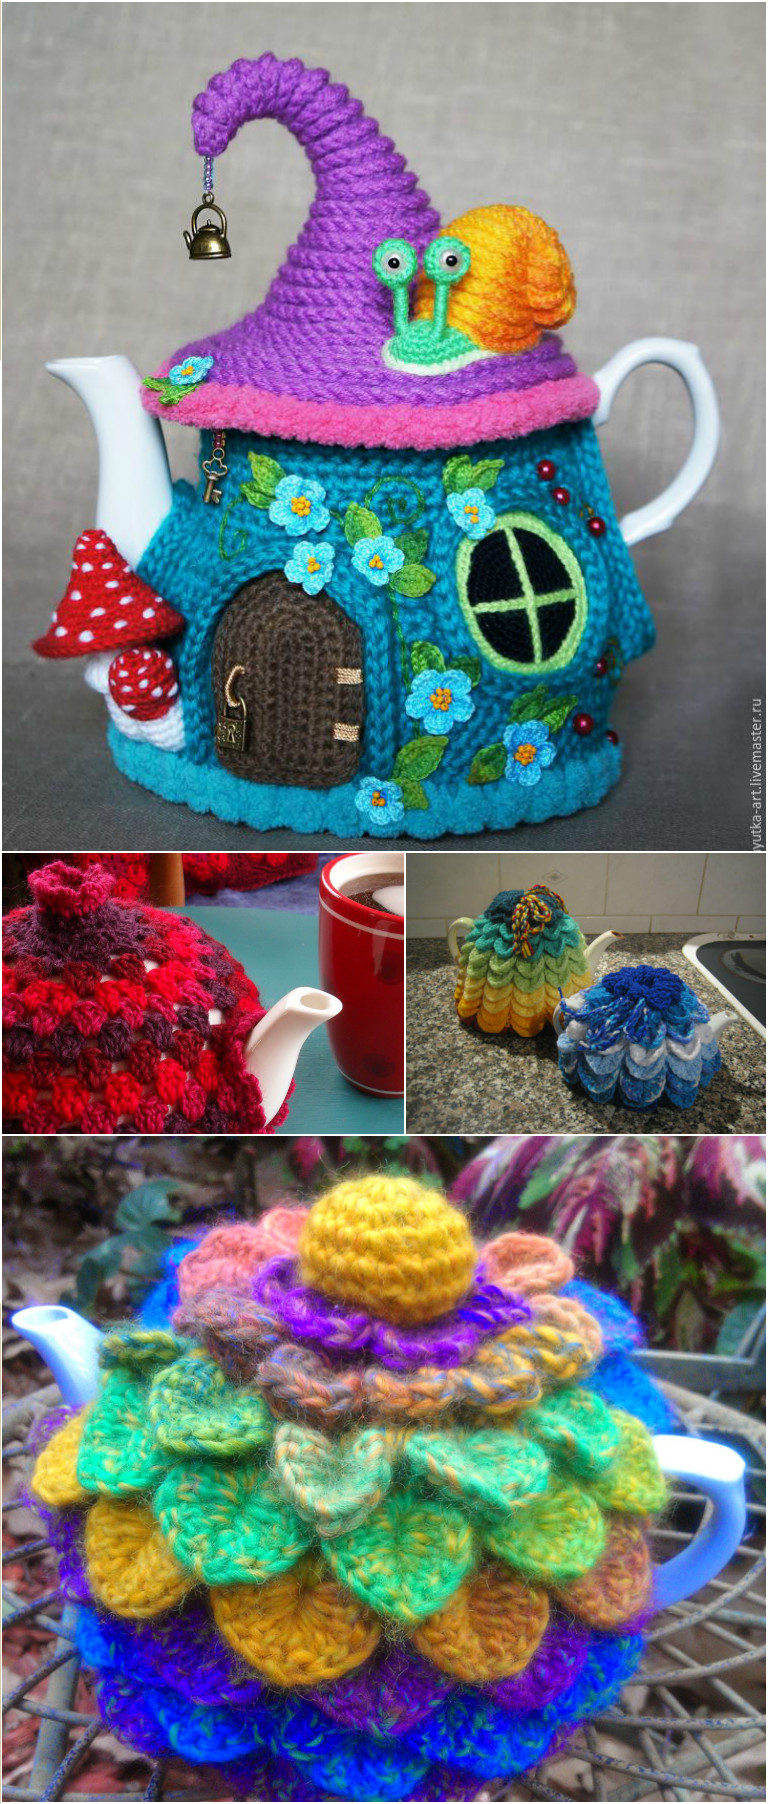 Tea Cozy Patterns To Knit These Fairy House Tea Cosy Patterns Are Absolutely Button Cute Pondic